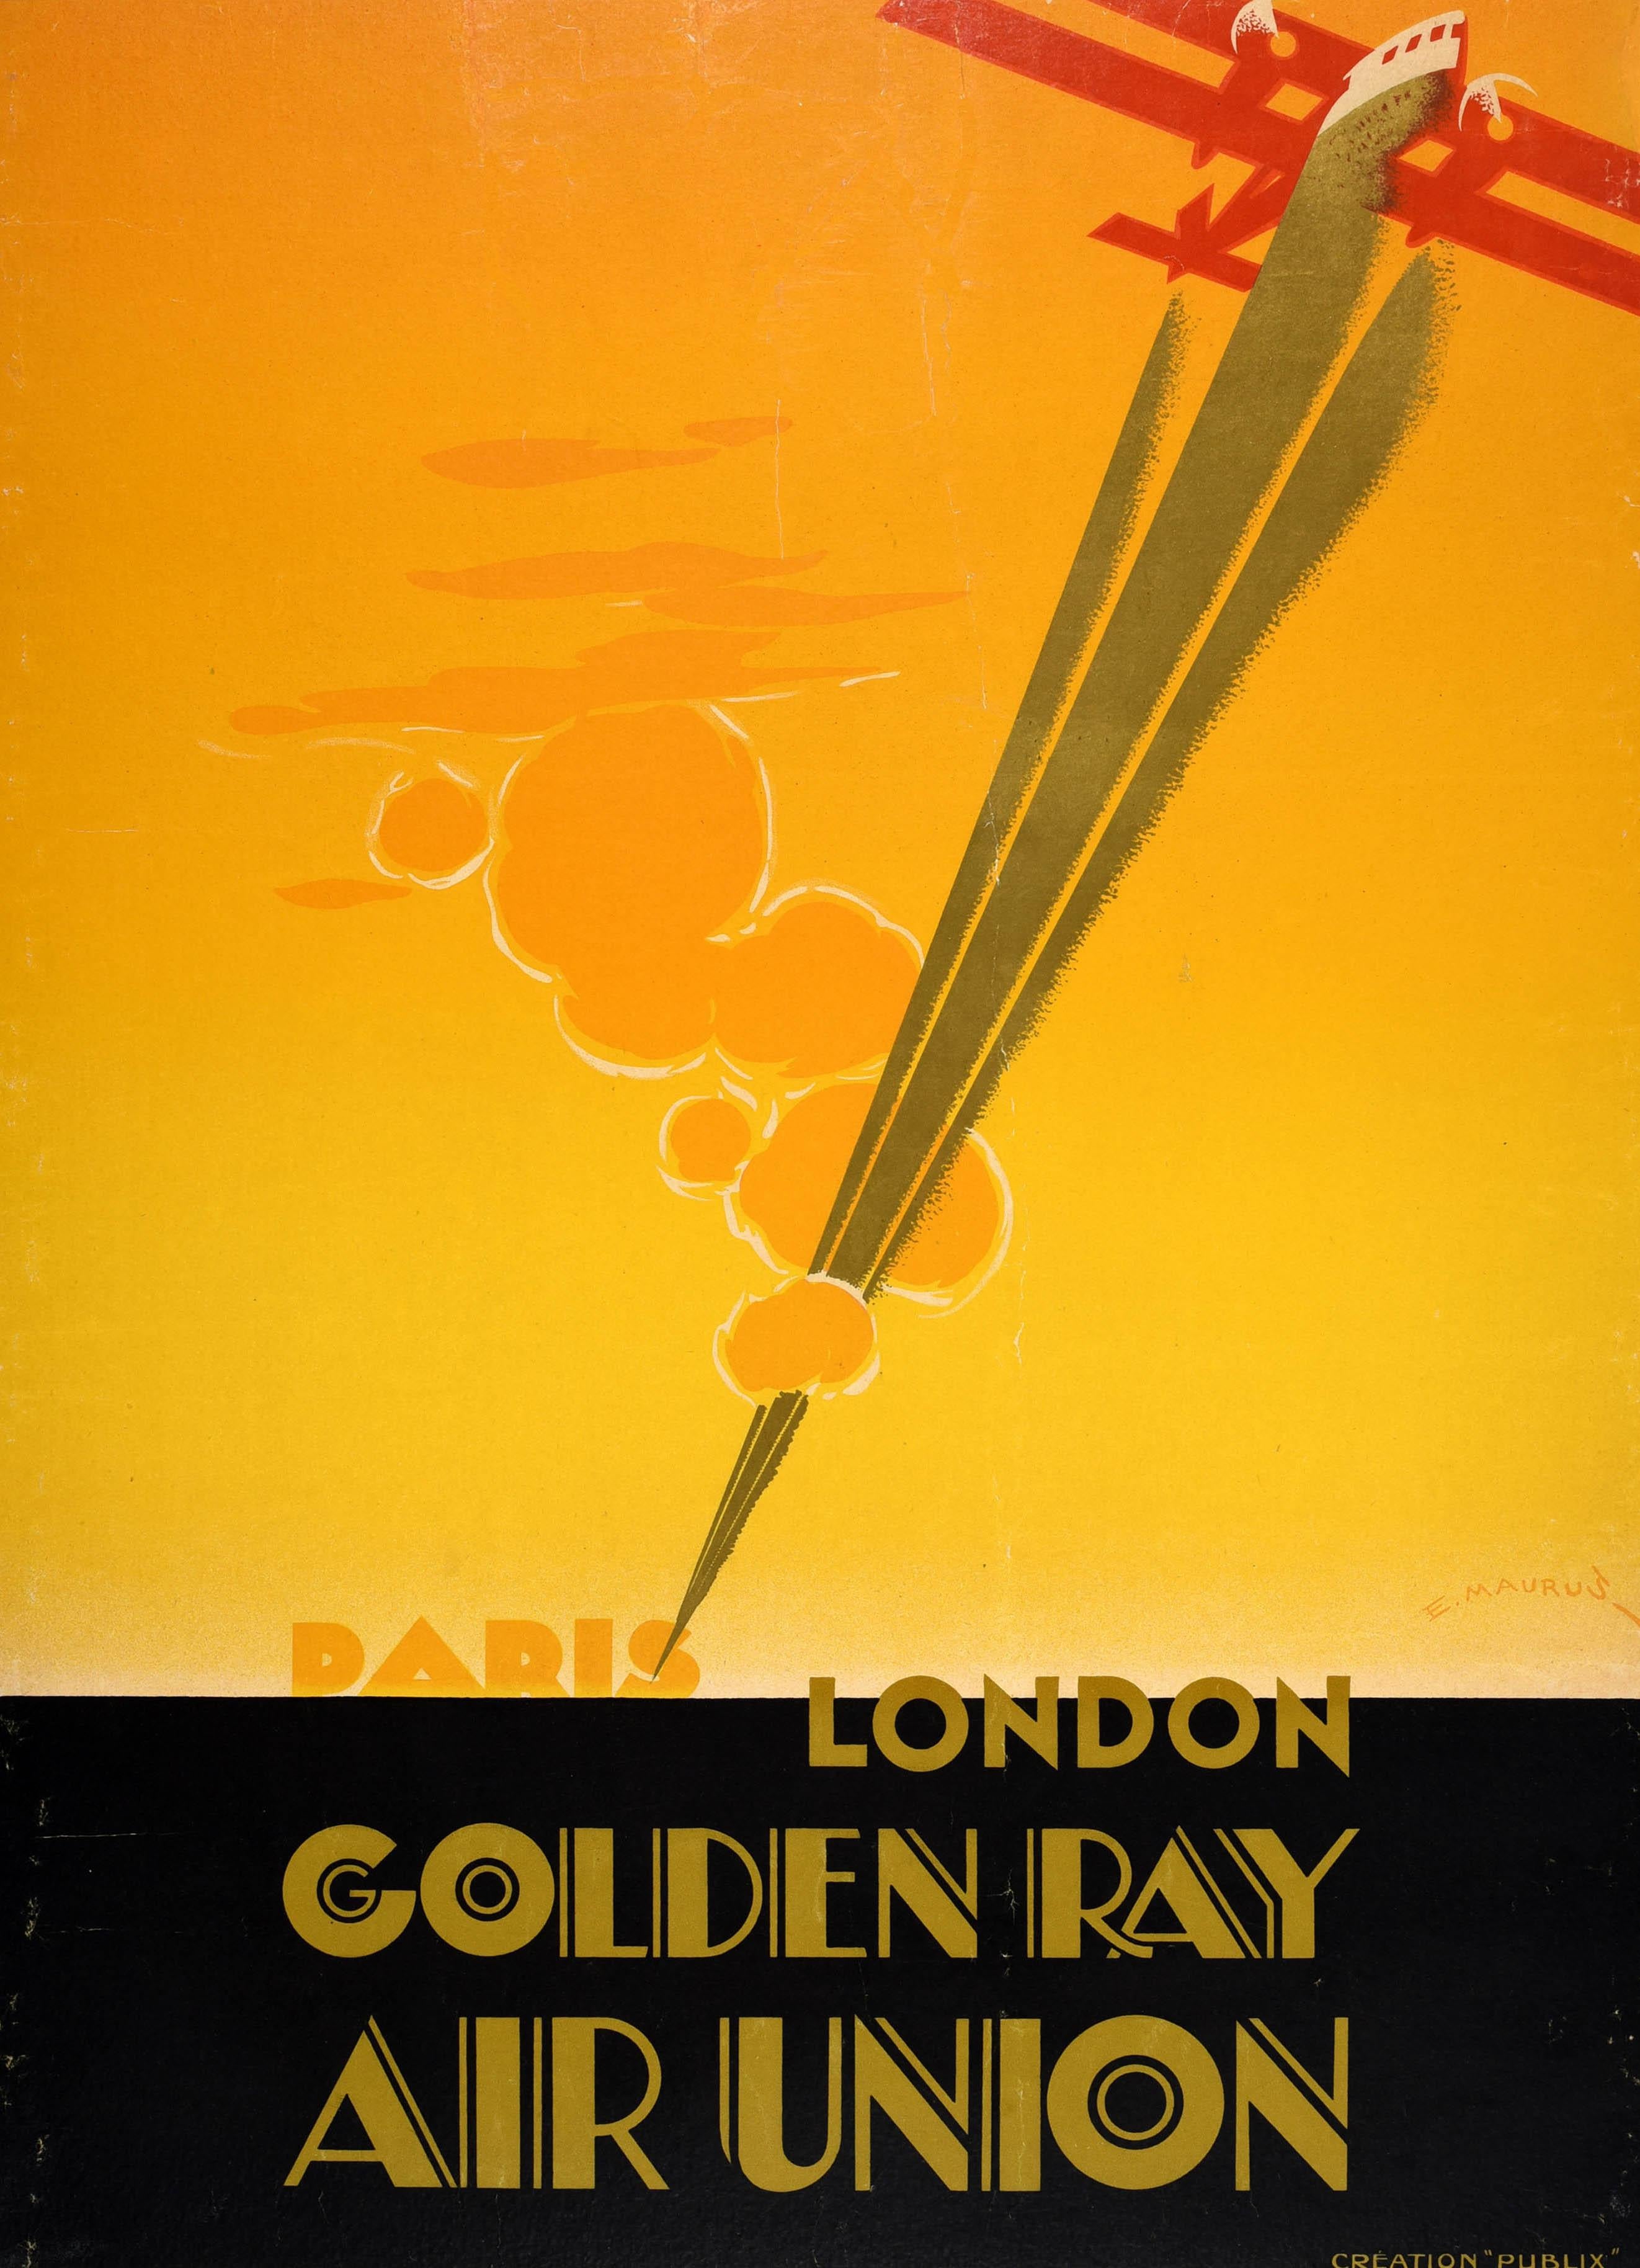 Original vintage travel poster - Paris London Golden Ray Air Union - featuring a stunning Art Deco design by Edmond Maurus (1903-1977) depicting a propeller plane flying at speed through a cloudy yellow and orange shaded sky with the stylised title